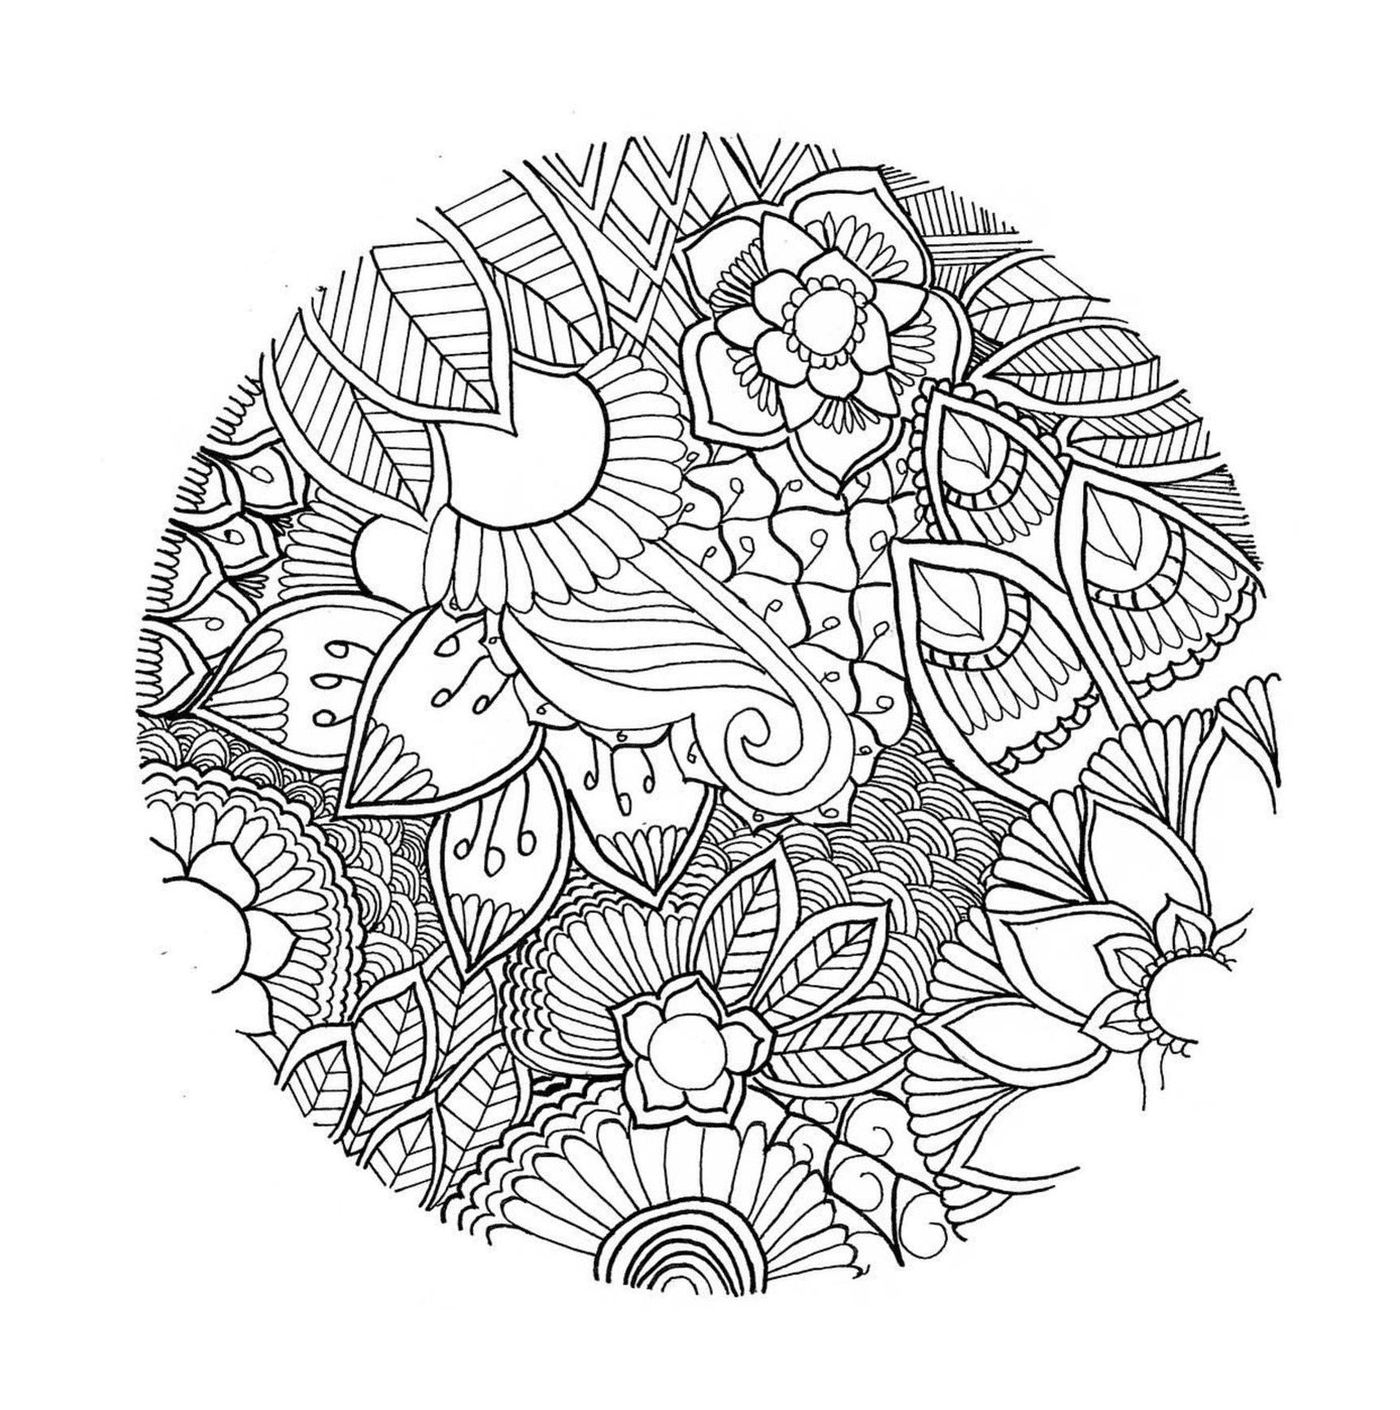  Adult Mandala with forest flowers 